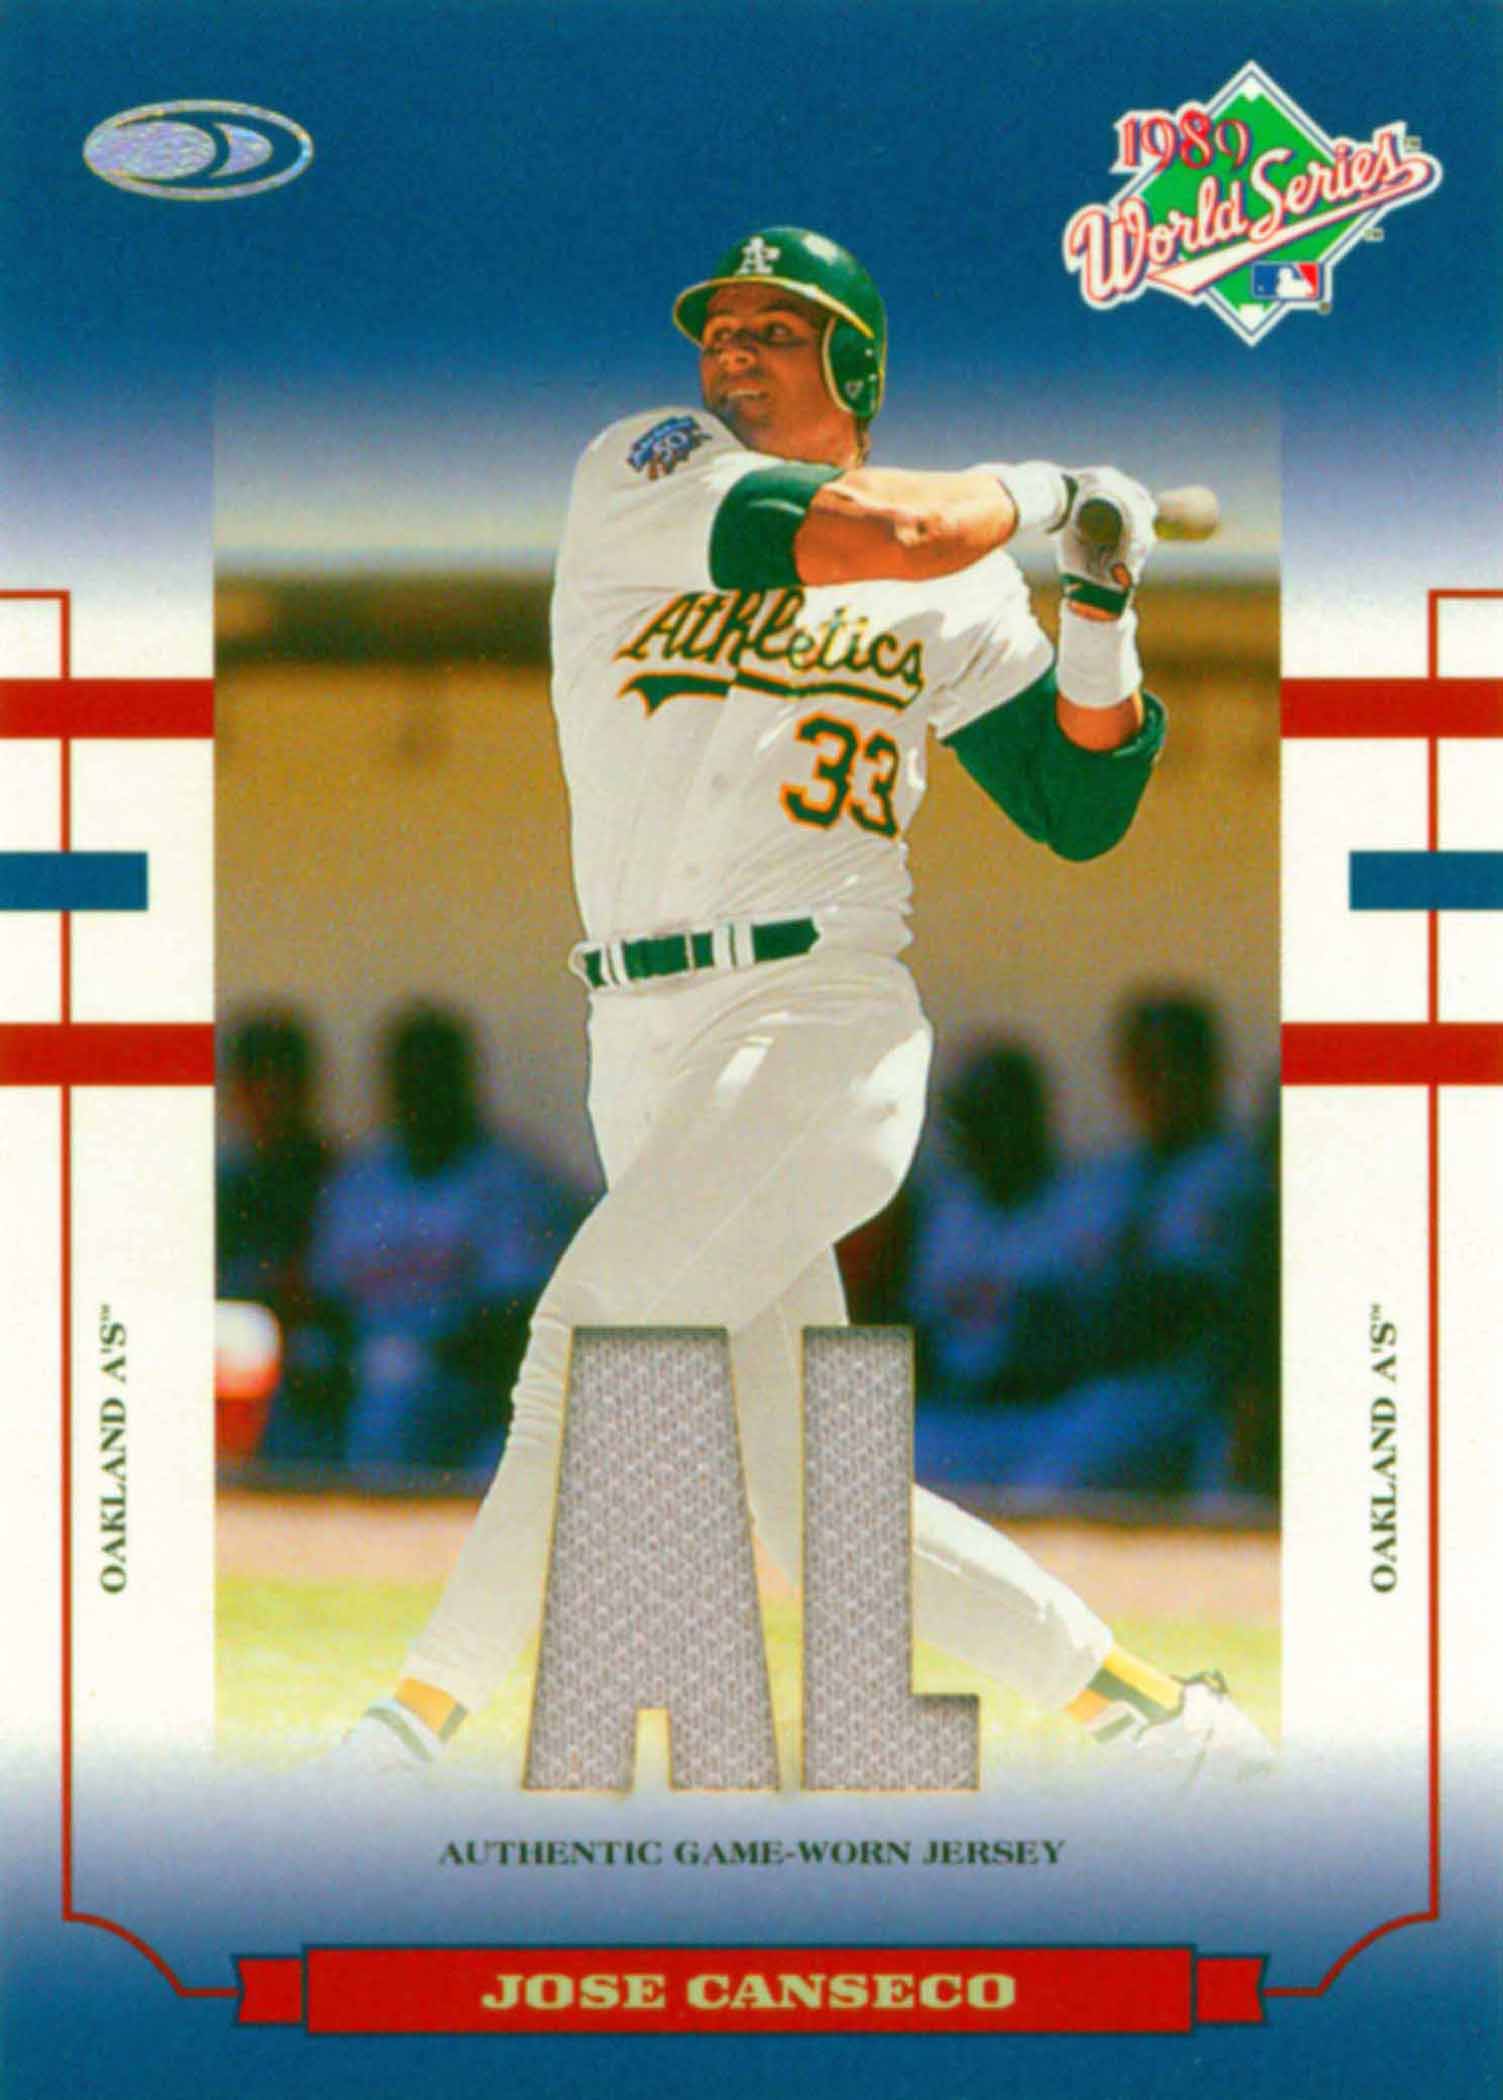 Jose Canseco Oakland Athletics LIMITED STOCK Glossy Card Stock 8X10 Photo 